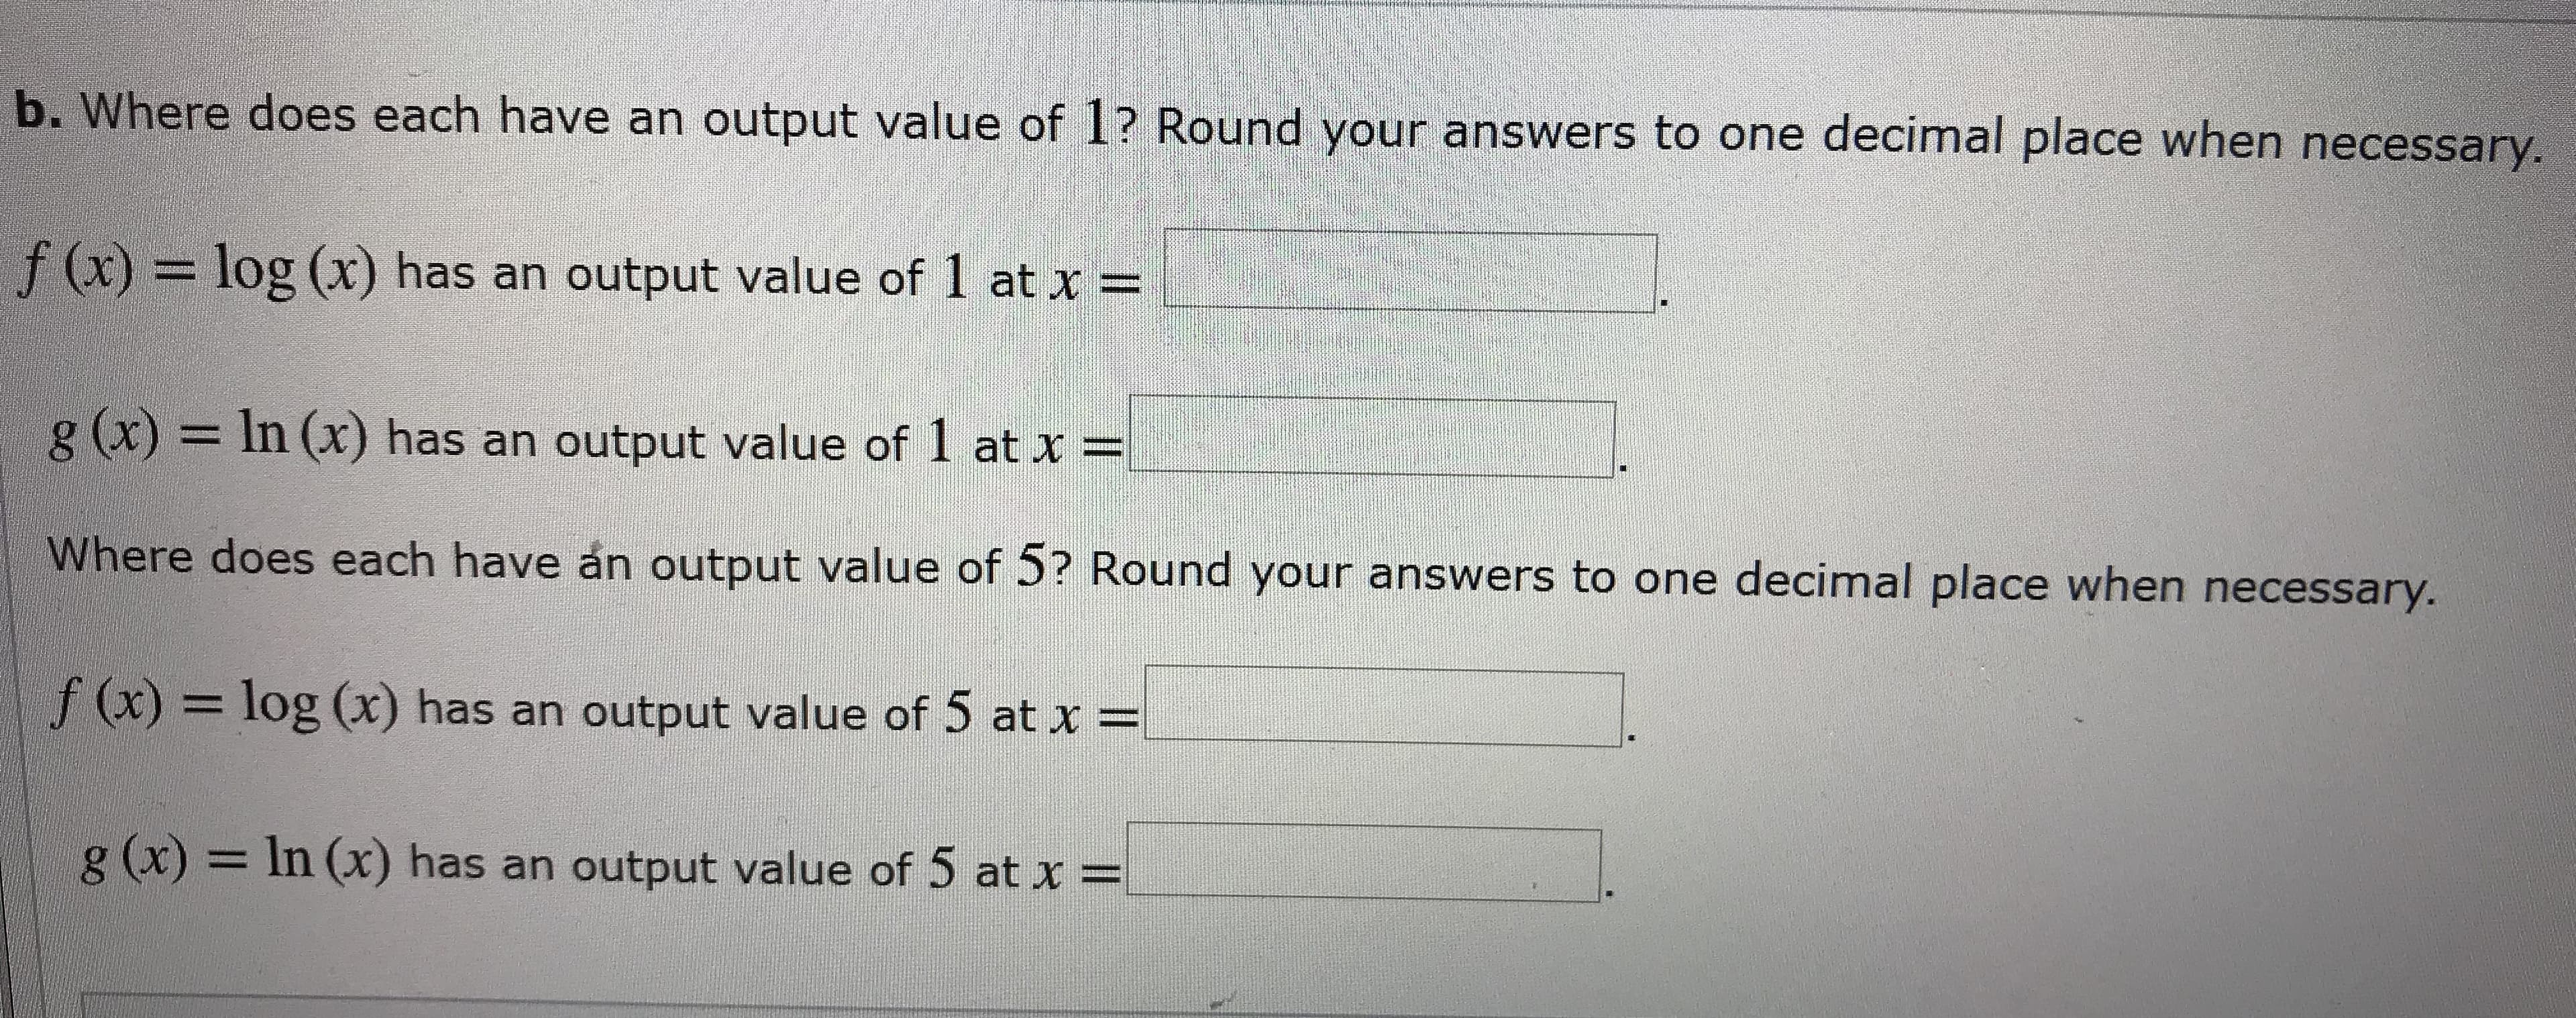 b. Where does each have an output value of 1? Round your answers to one decimal place when necessary.
f (x)= log (x) has an output value of
at x
g (x)
In (x) has an output value of I at x =
Where does each have an output value of 5? Round your answers to one decimal place when necessary.
f (x)= log (x) has an output value of 5 at x
g (x) = In (x) has an output value of 5 at x =
